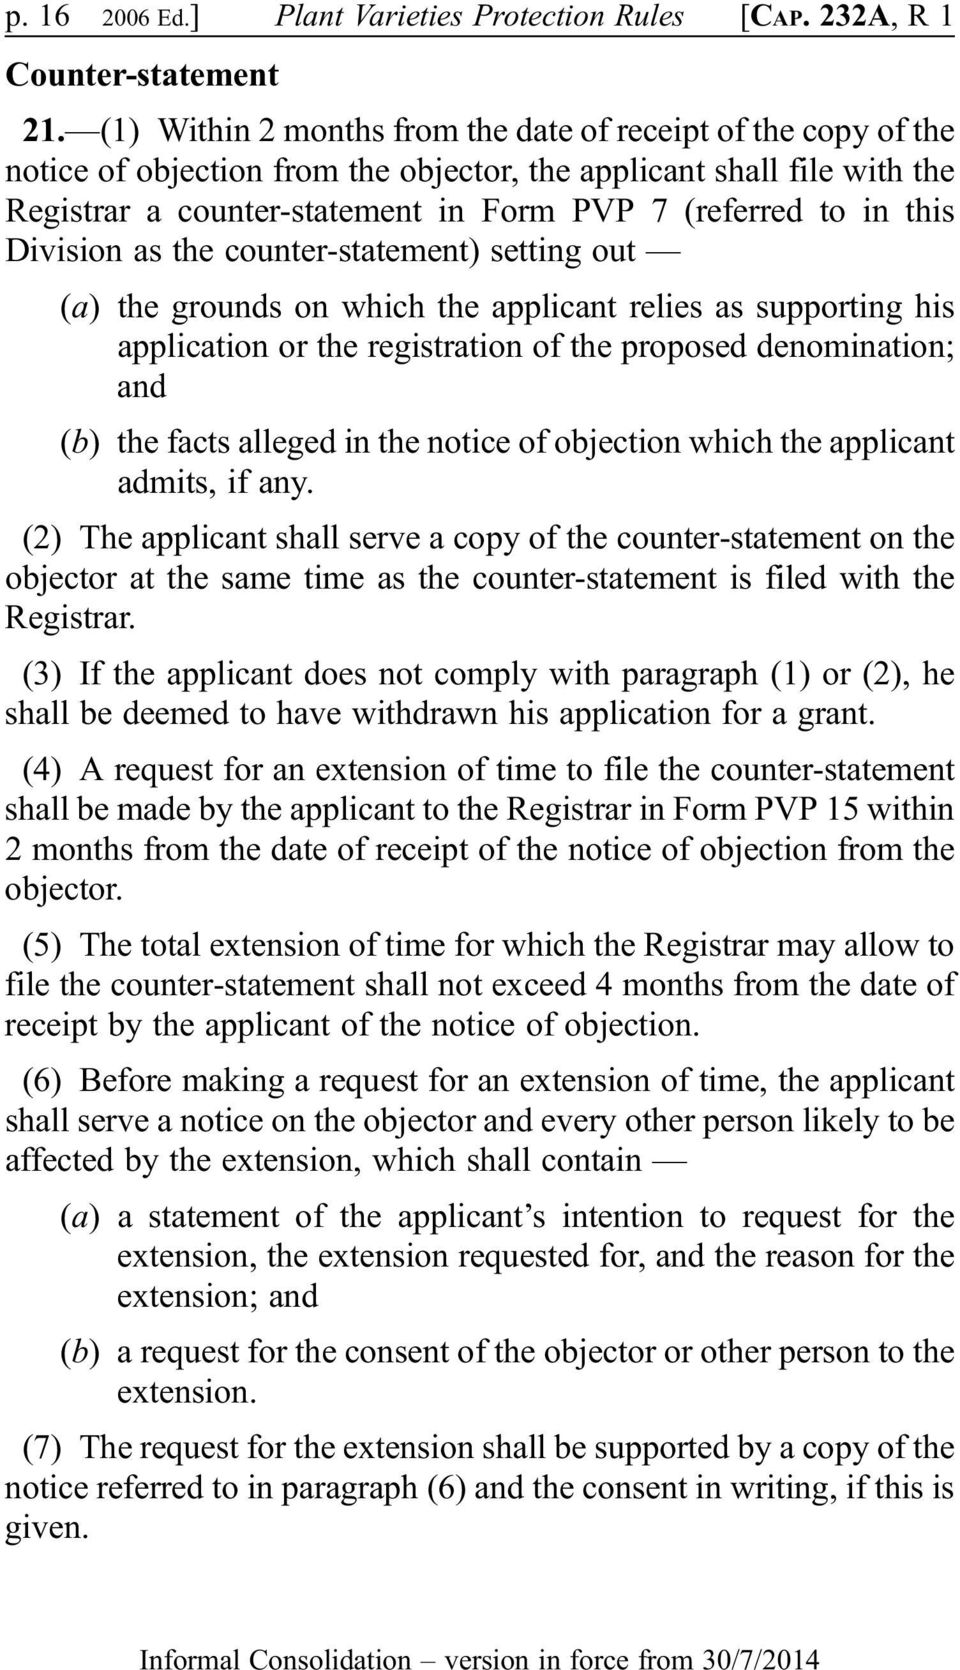 this Division as the counter-statement) setting out (a) the grounds on which the applicant relies as supporting his application or the registration of the proposed denomination; and (b) the facts